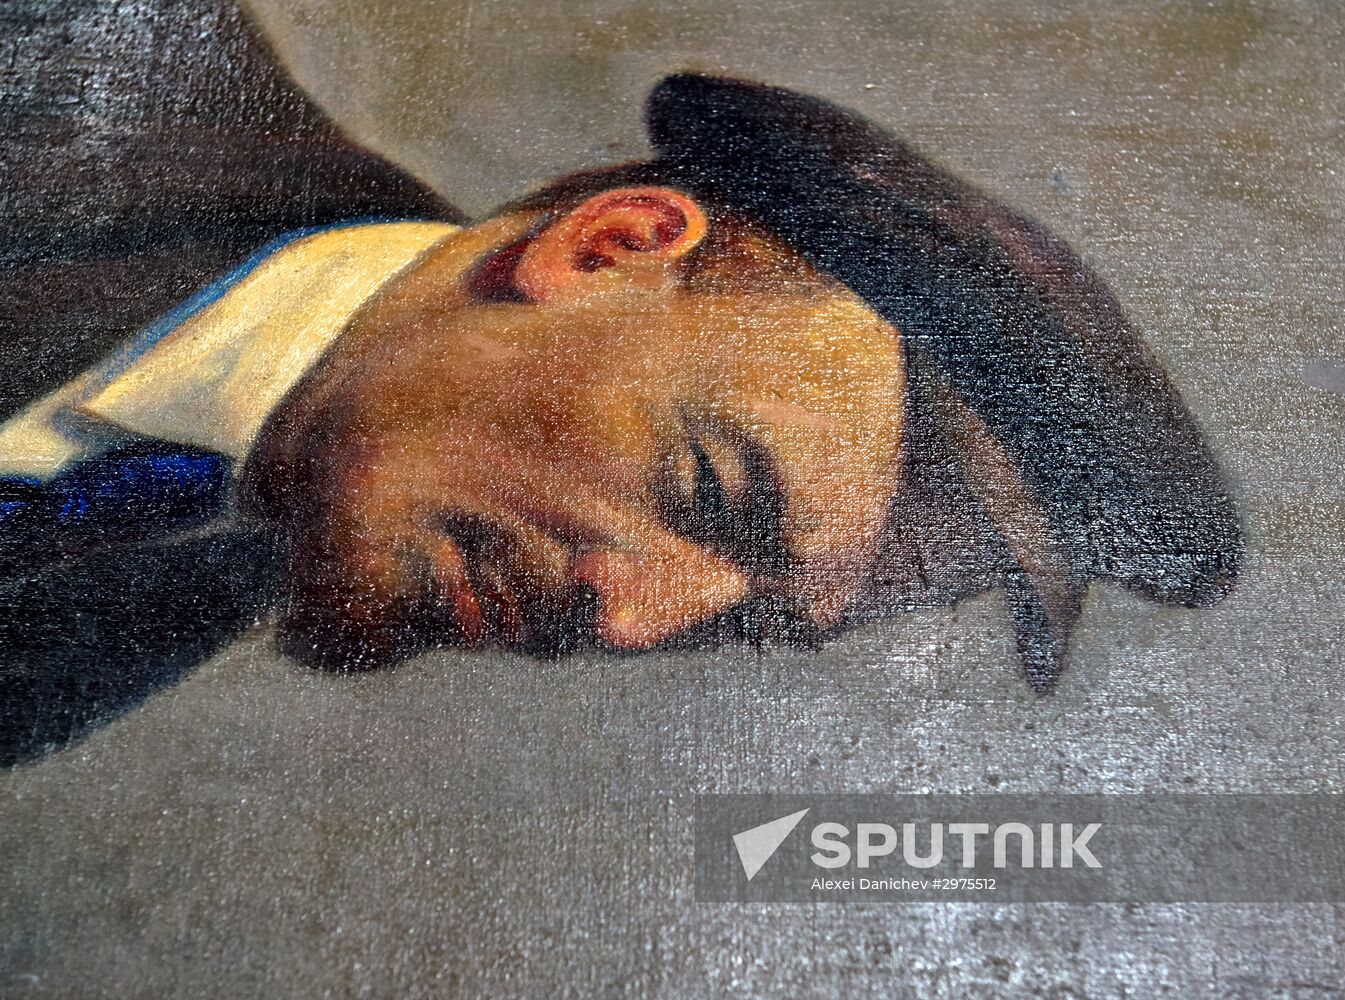 Presetation of discovered portrait of Czar Nicholas II at the Stieglitz Art and Industry Academy in St. Petersburg